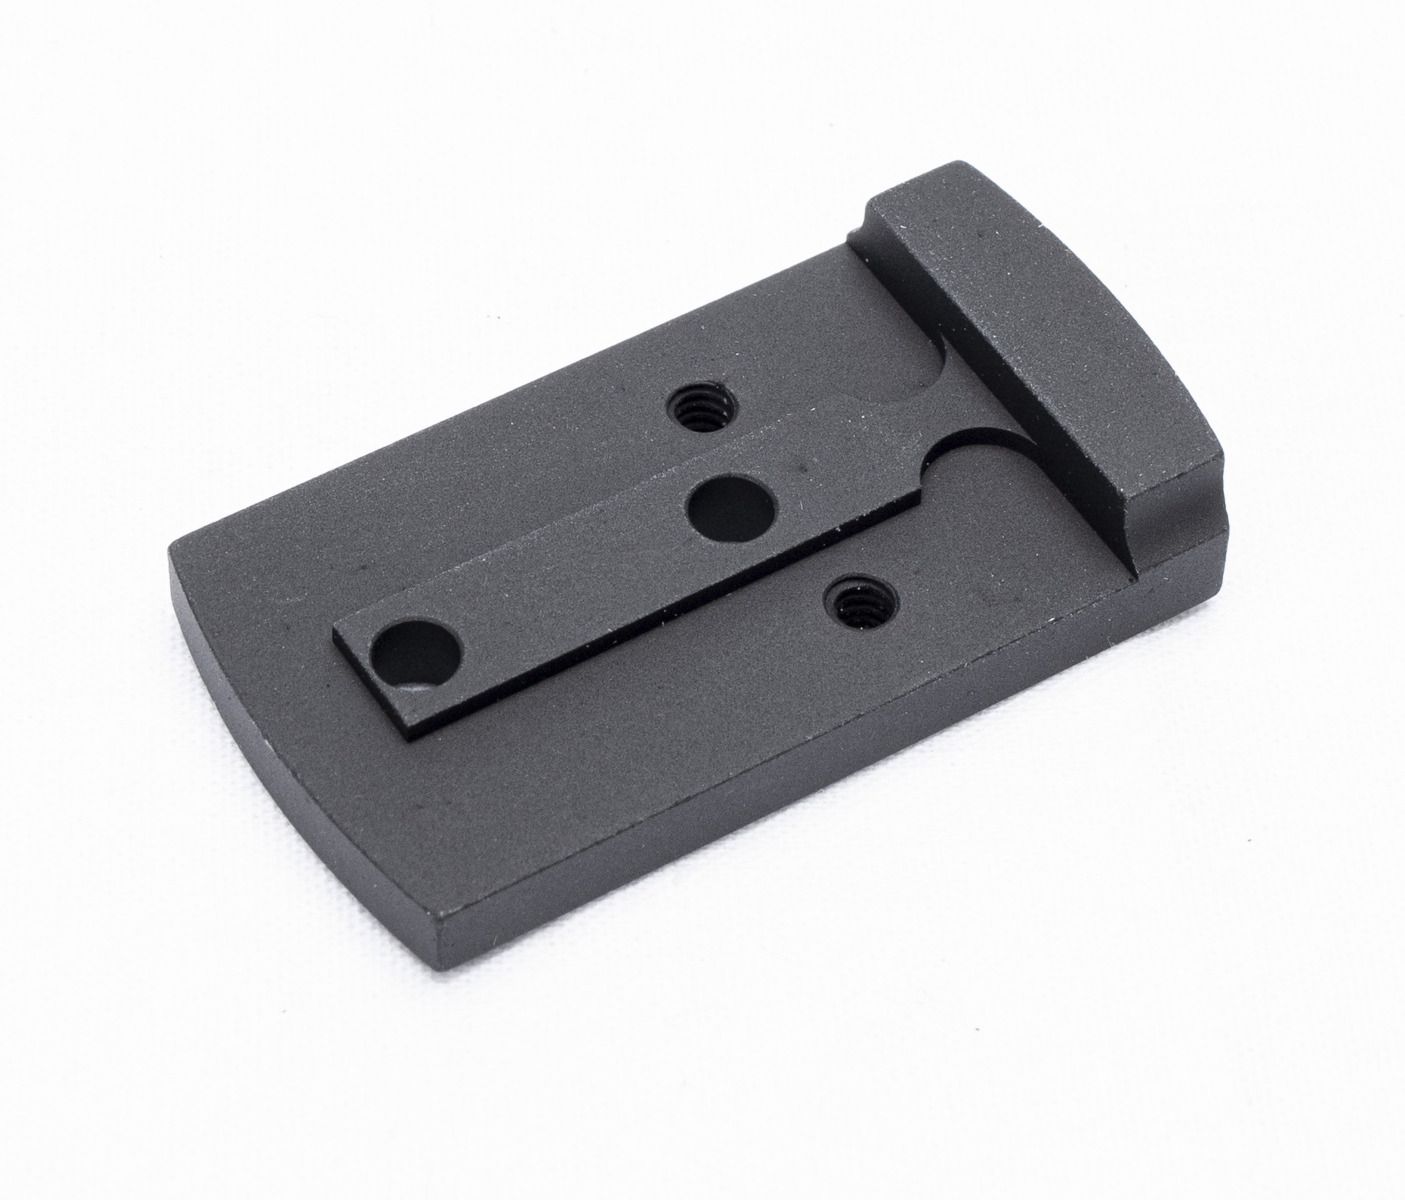 Red Dot Sight Mount for Smith and Wesson (S&W) Revolver (fits Vortex Viper / Venom, Burris FastFire and Docter)